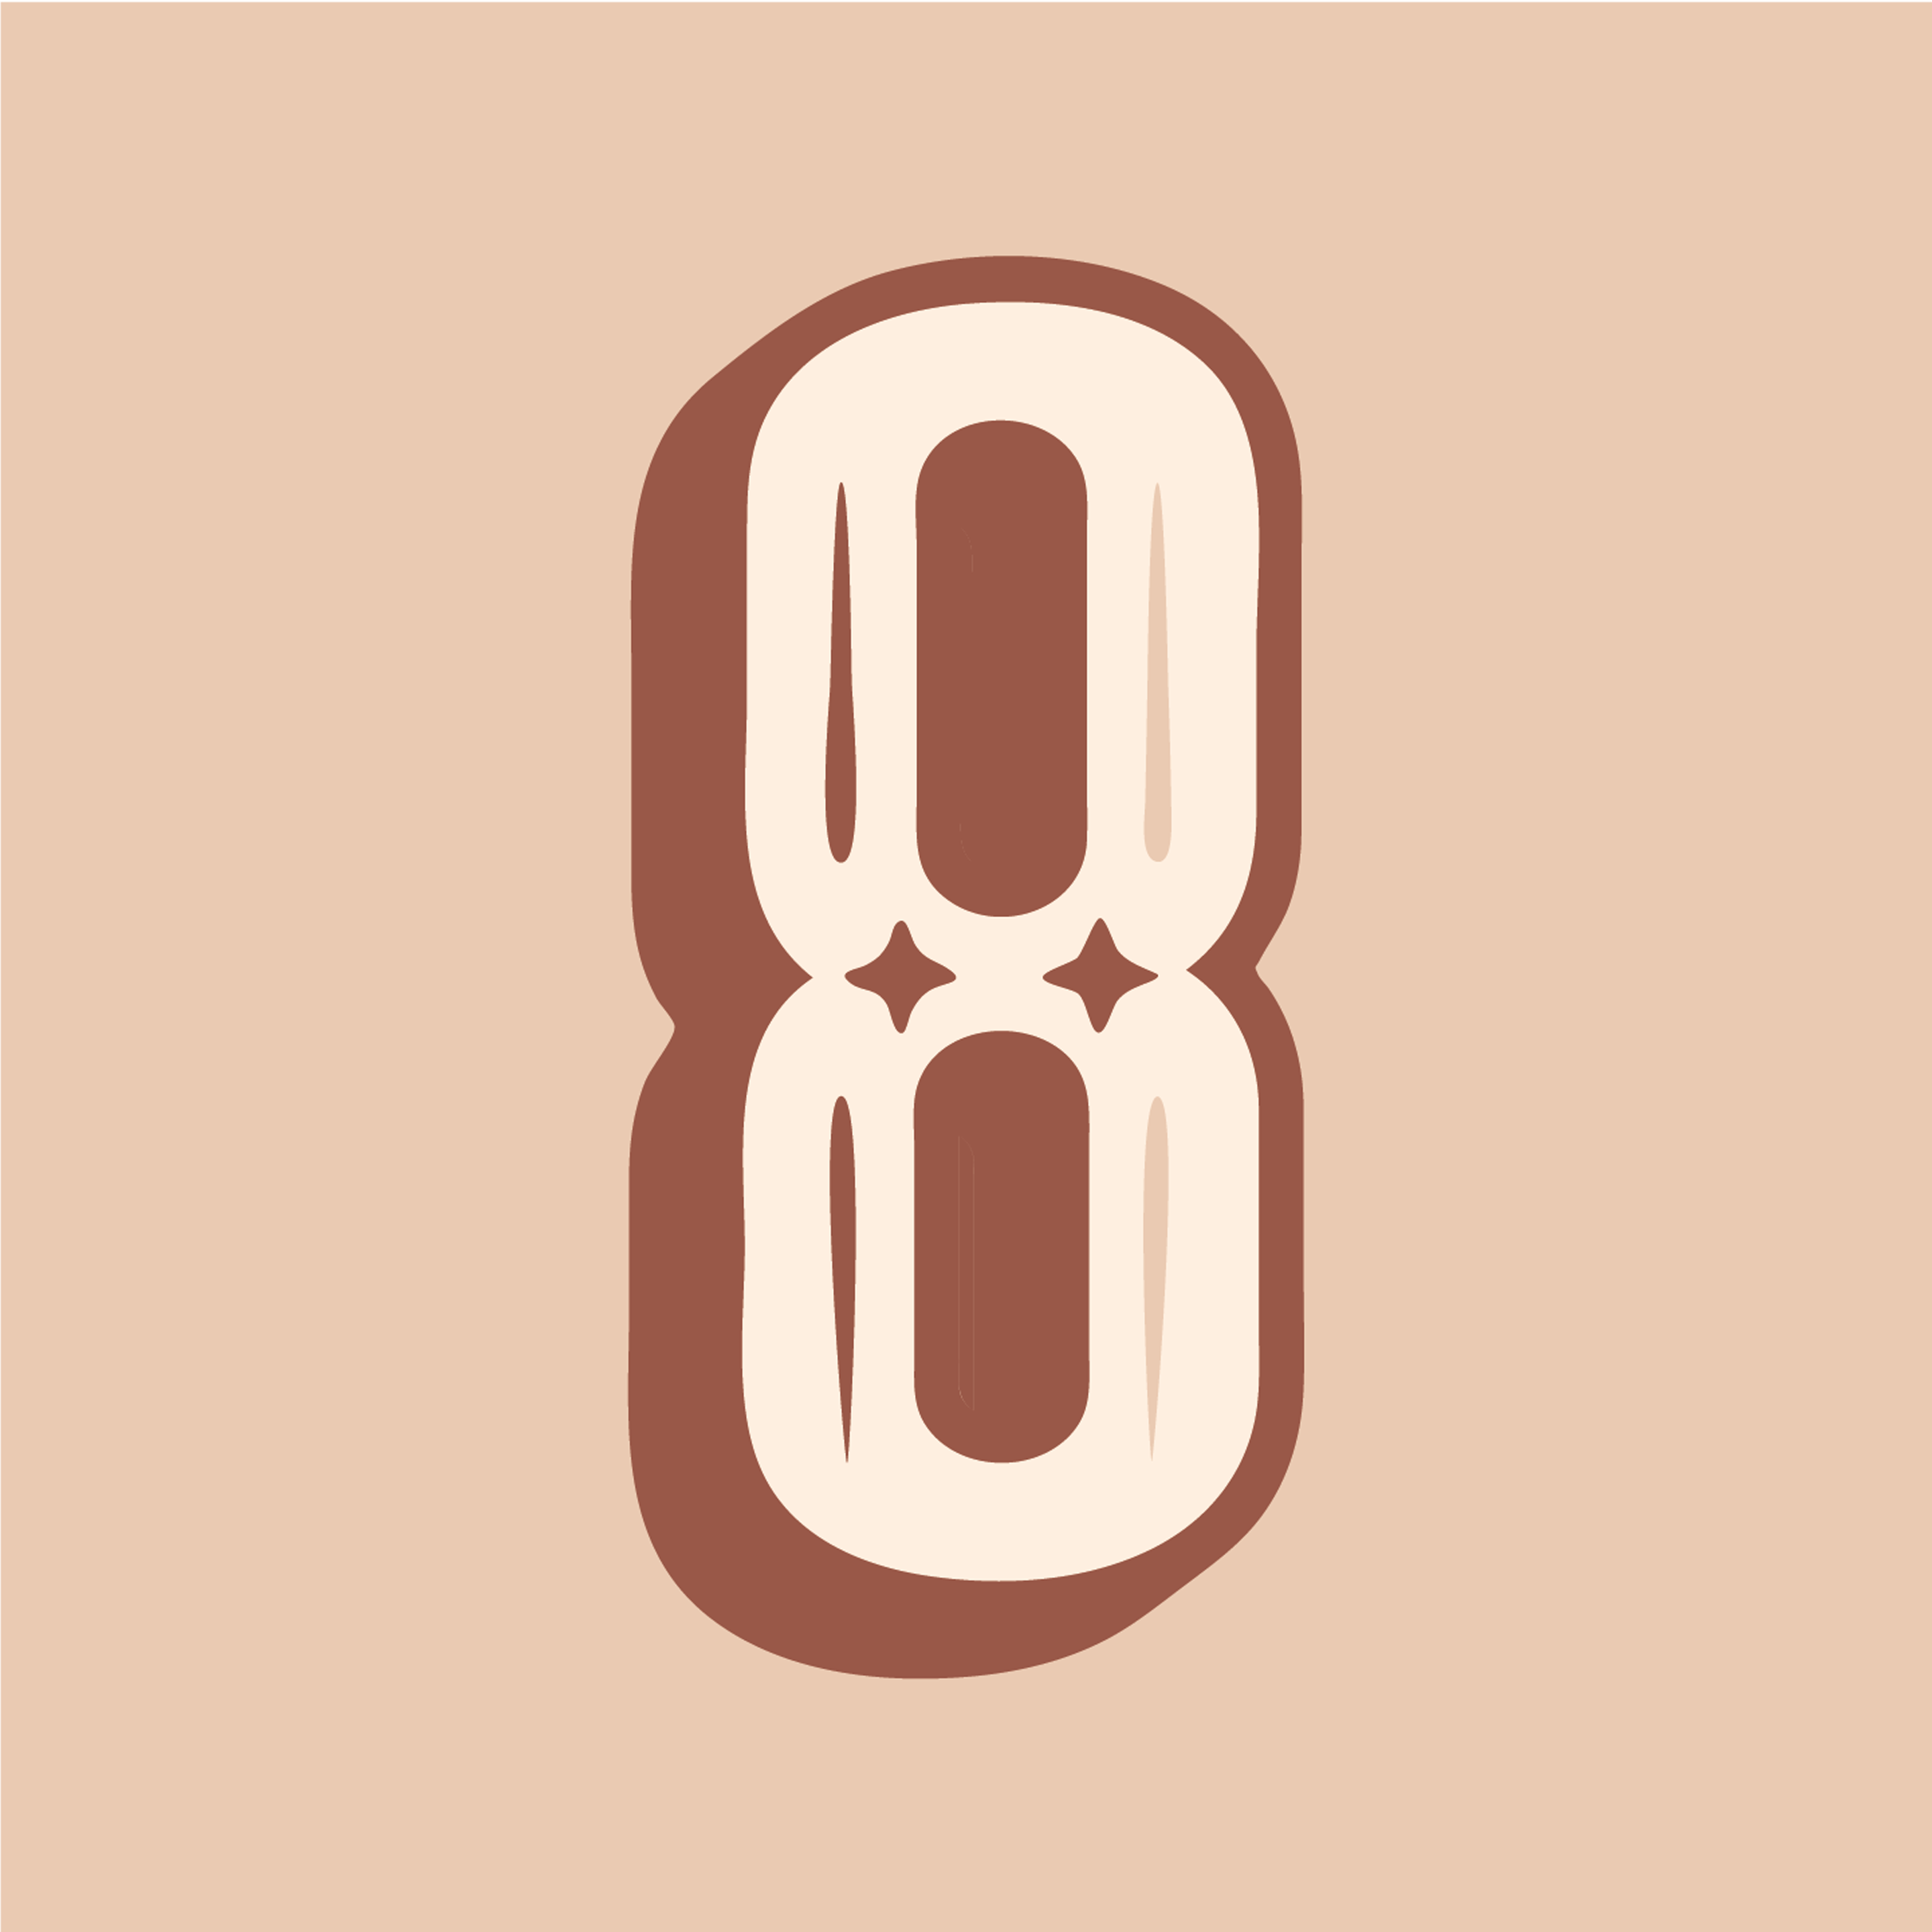 western-style-number-8-design-theme